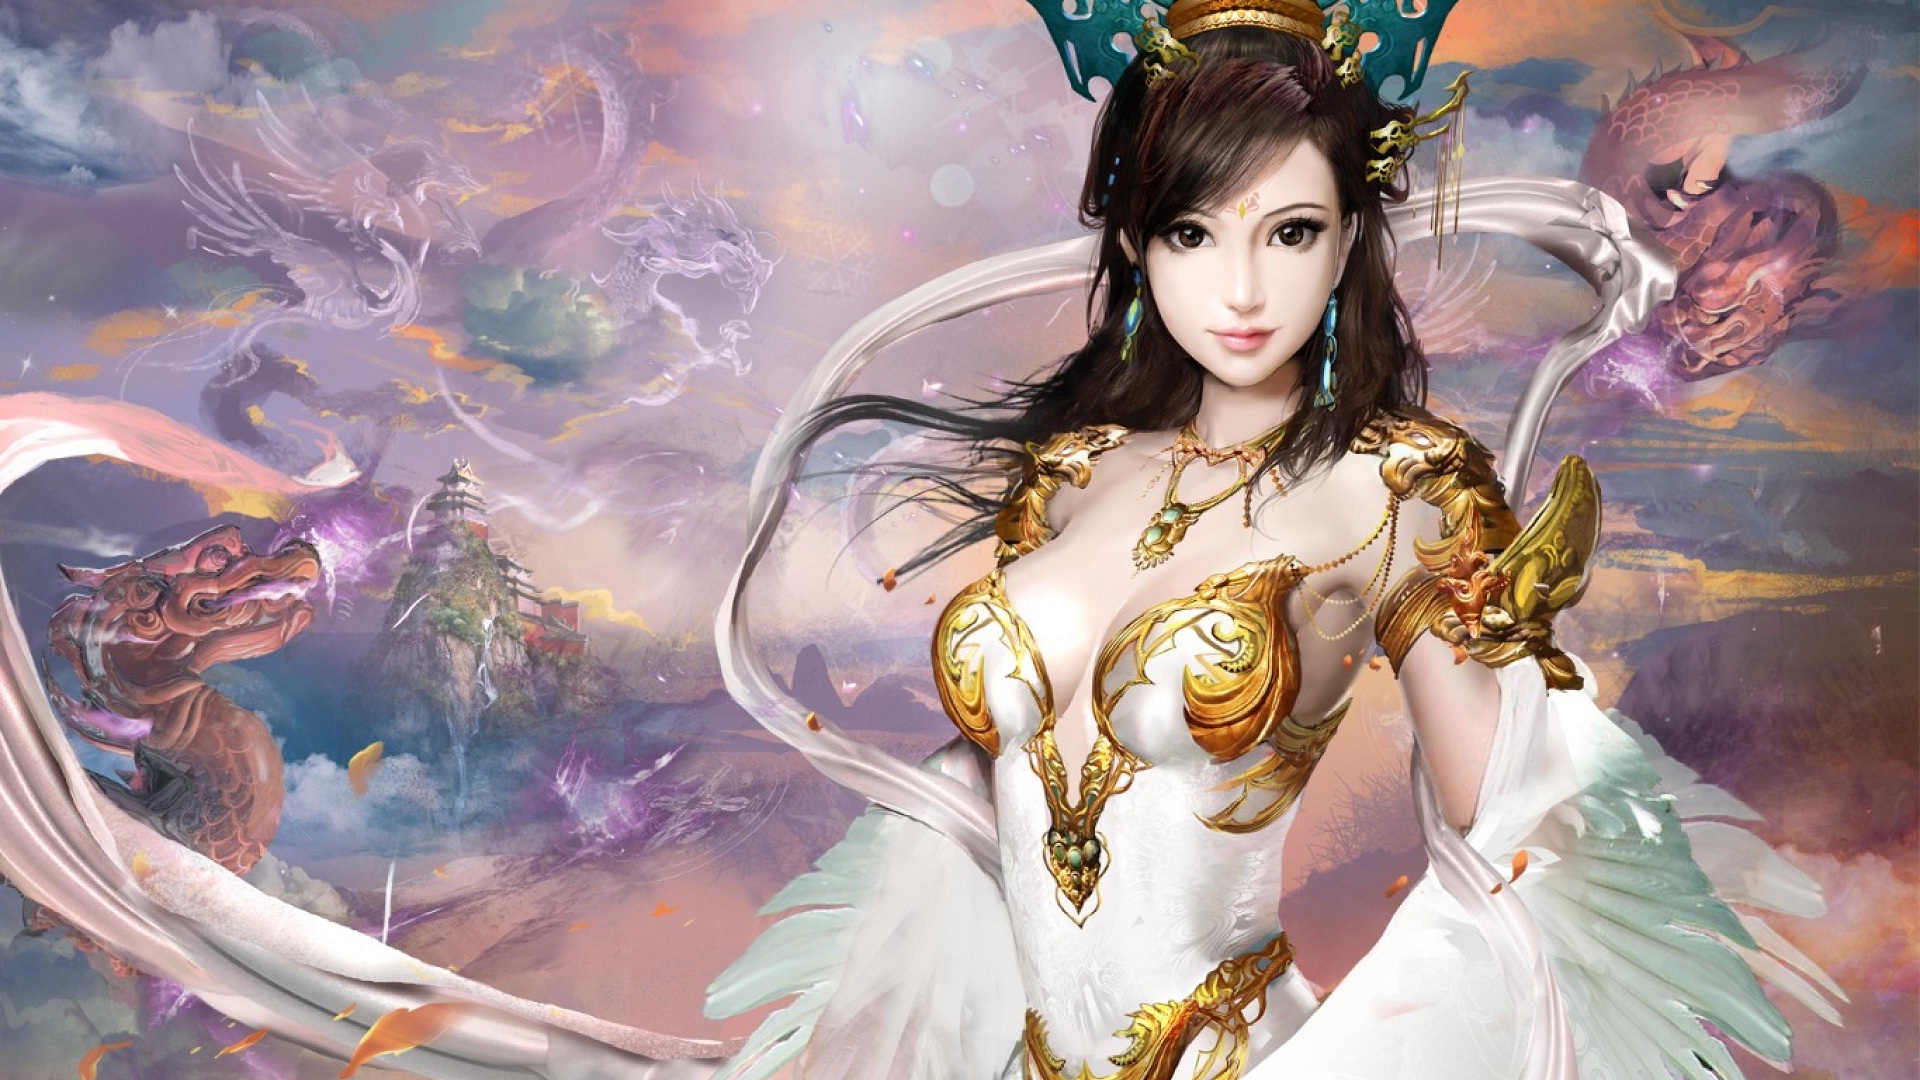 Fantasy Girl Full HD Wallpaper and Background Image | 1920x1080 | ID ...